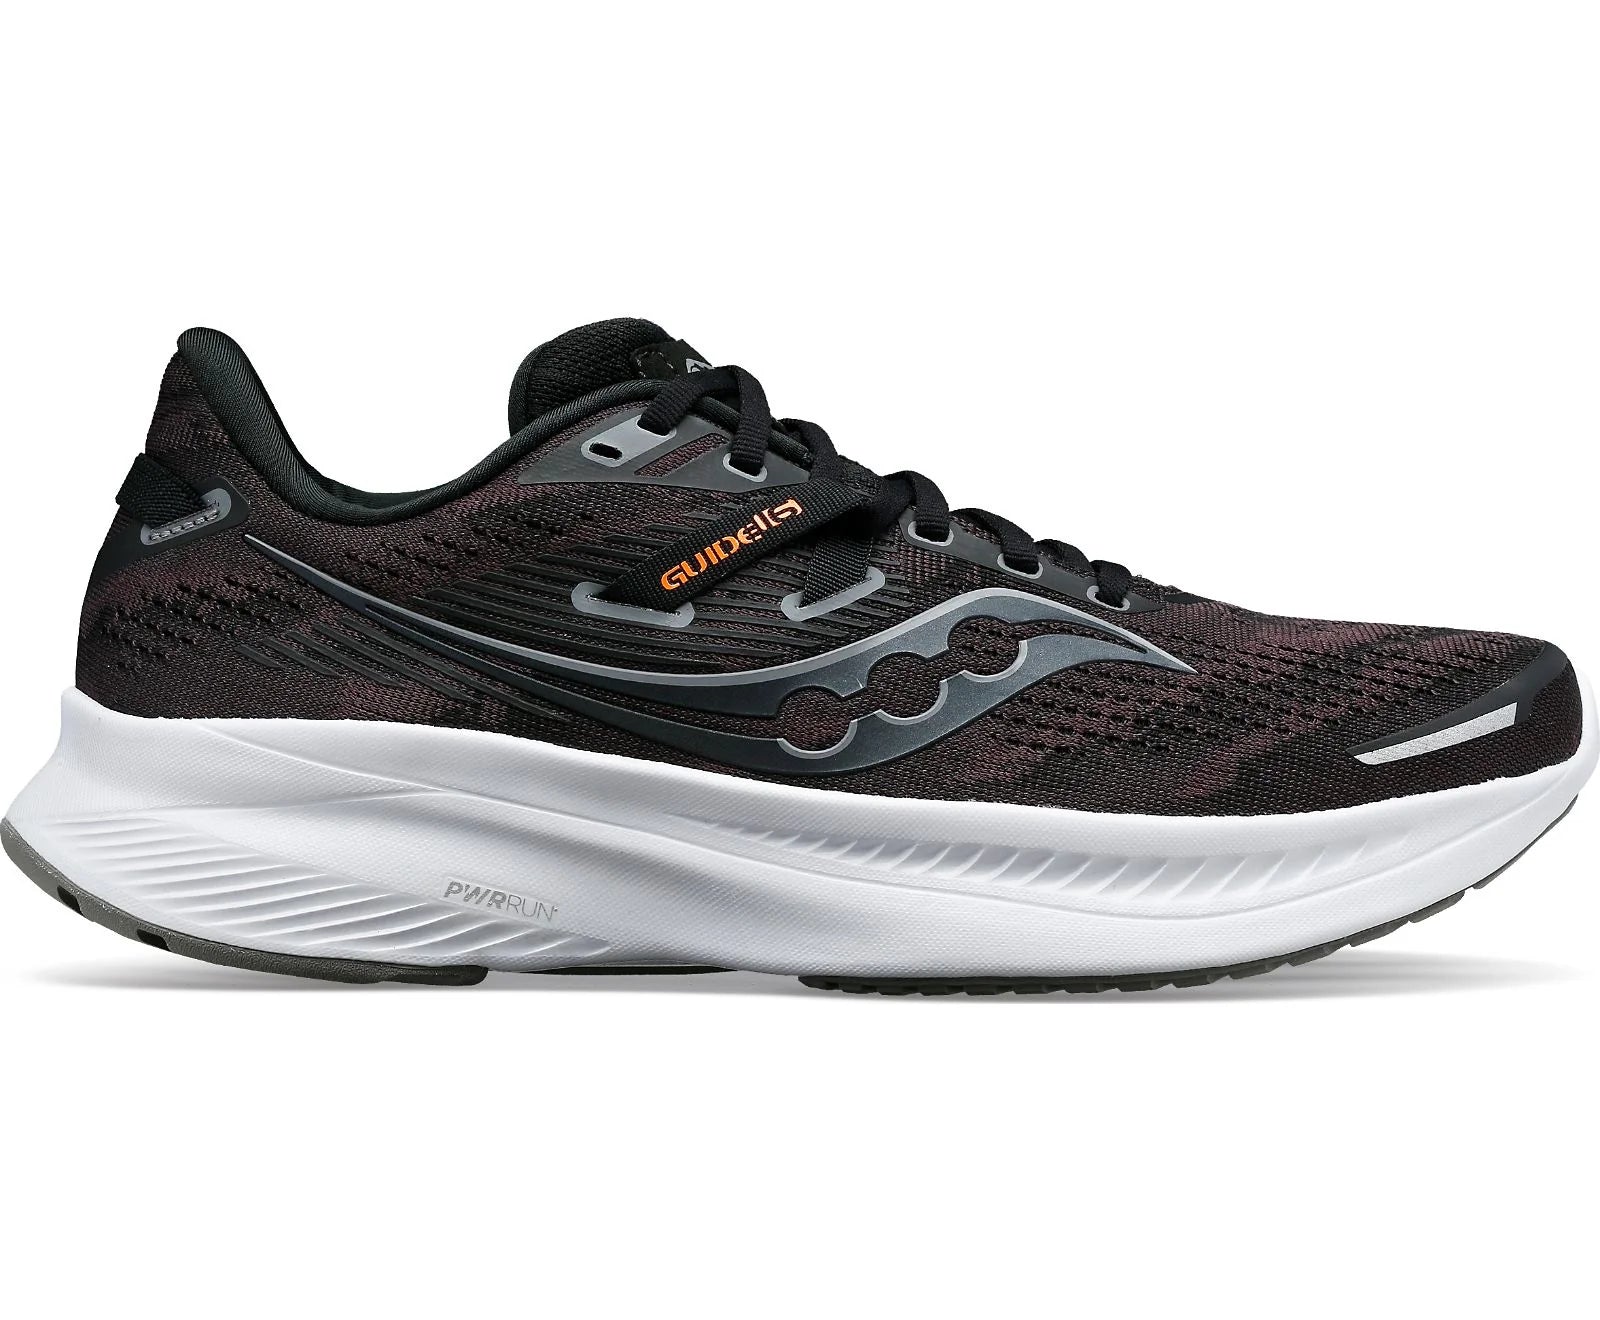 Lateral view of the Women's Guide 16 by Saucony in Black/White